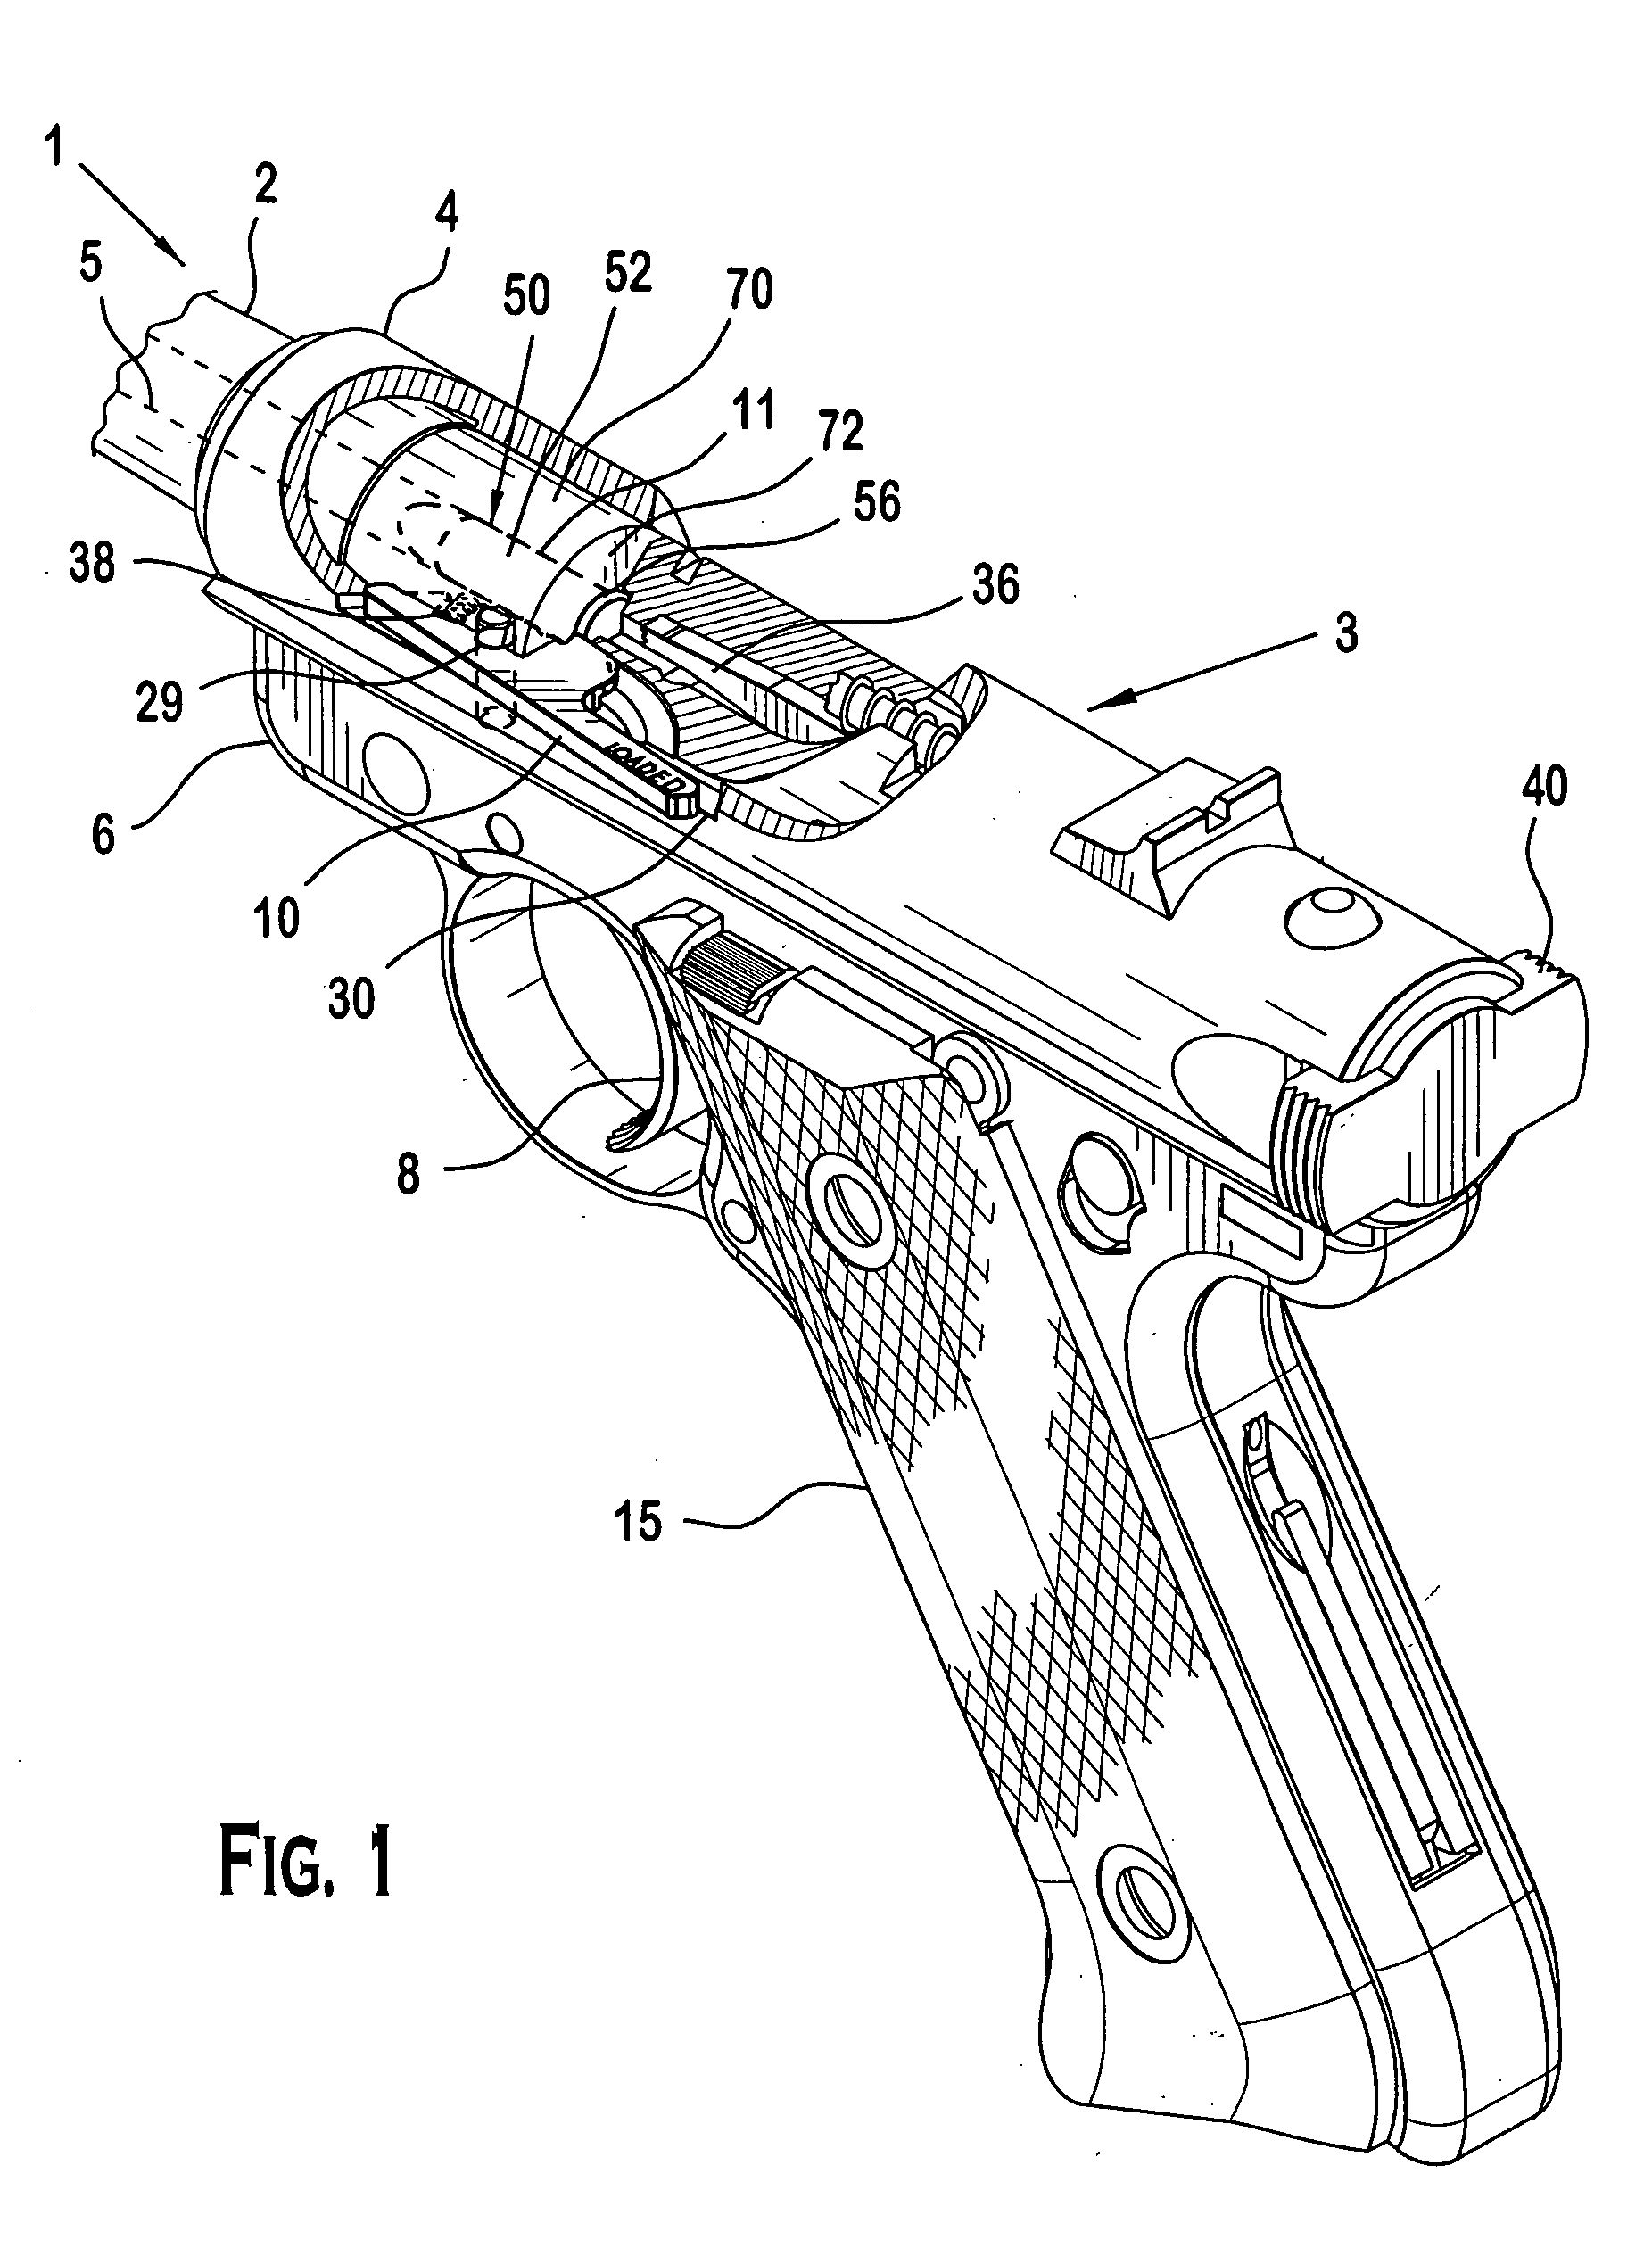 Pistol with loaded chamber indicator